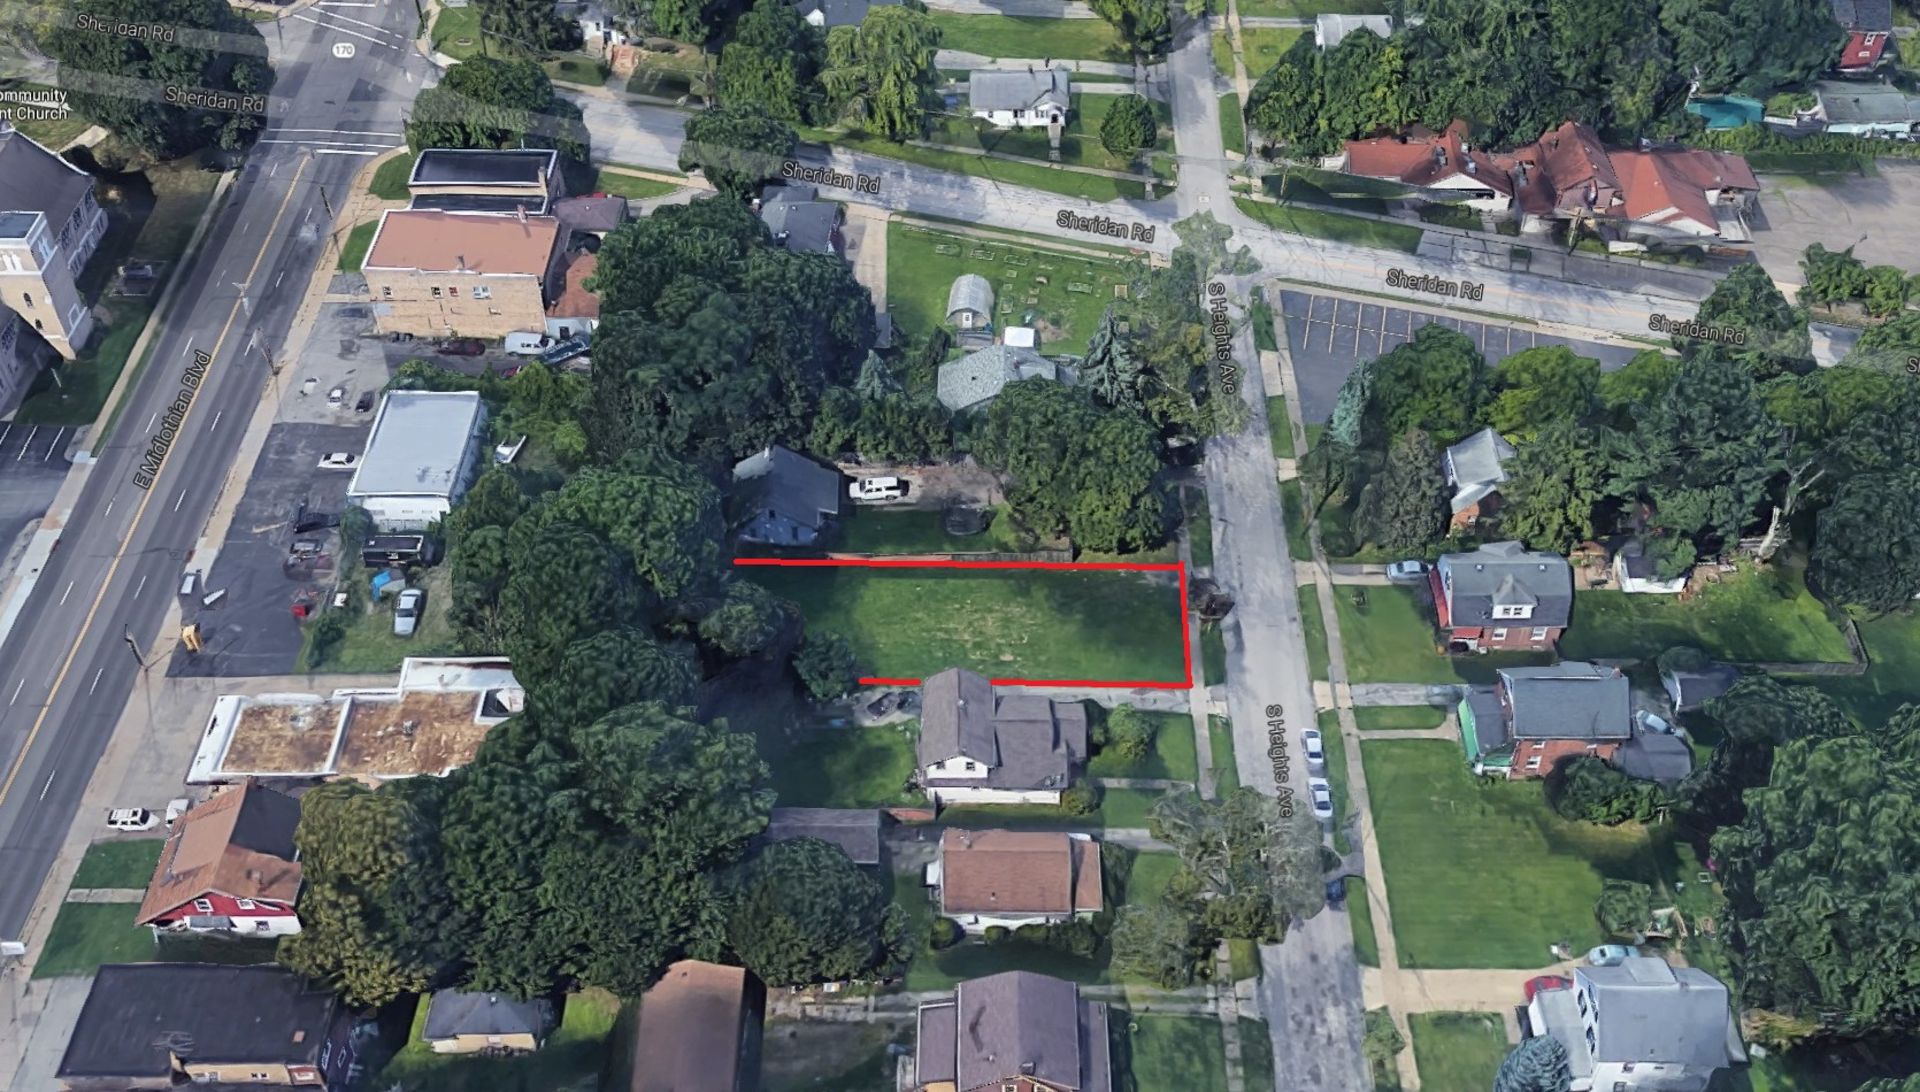 PLOT OF LAND AT 1921 S HEIGHTS AVENUE, YOUNGSTOWN, OHIO - Image 4 of 7